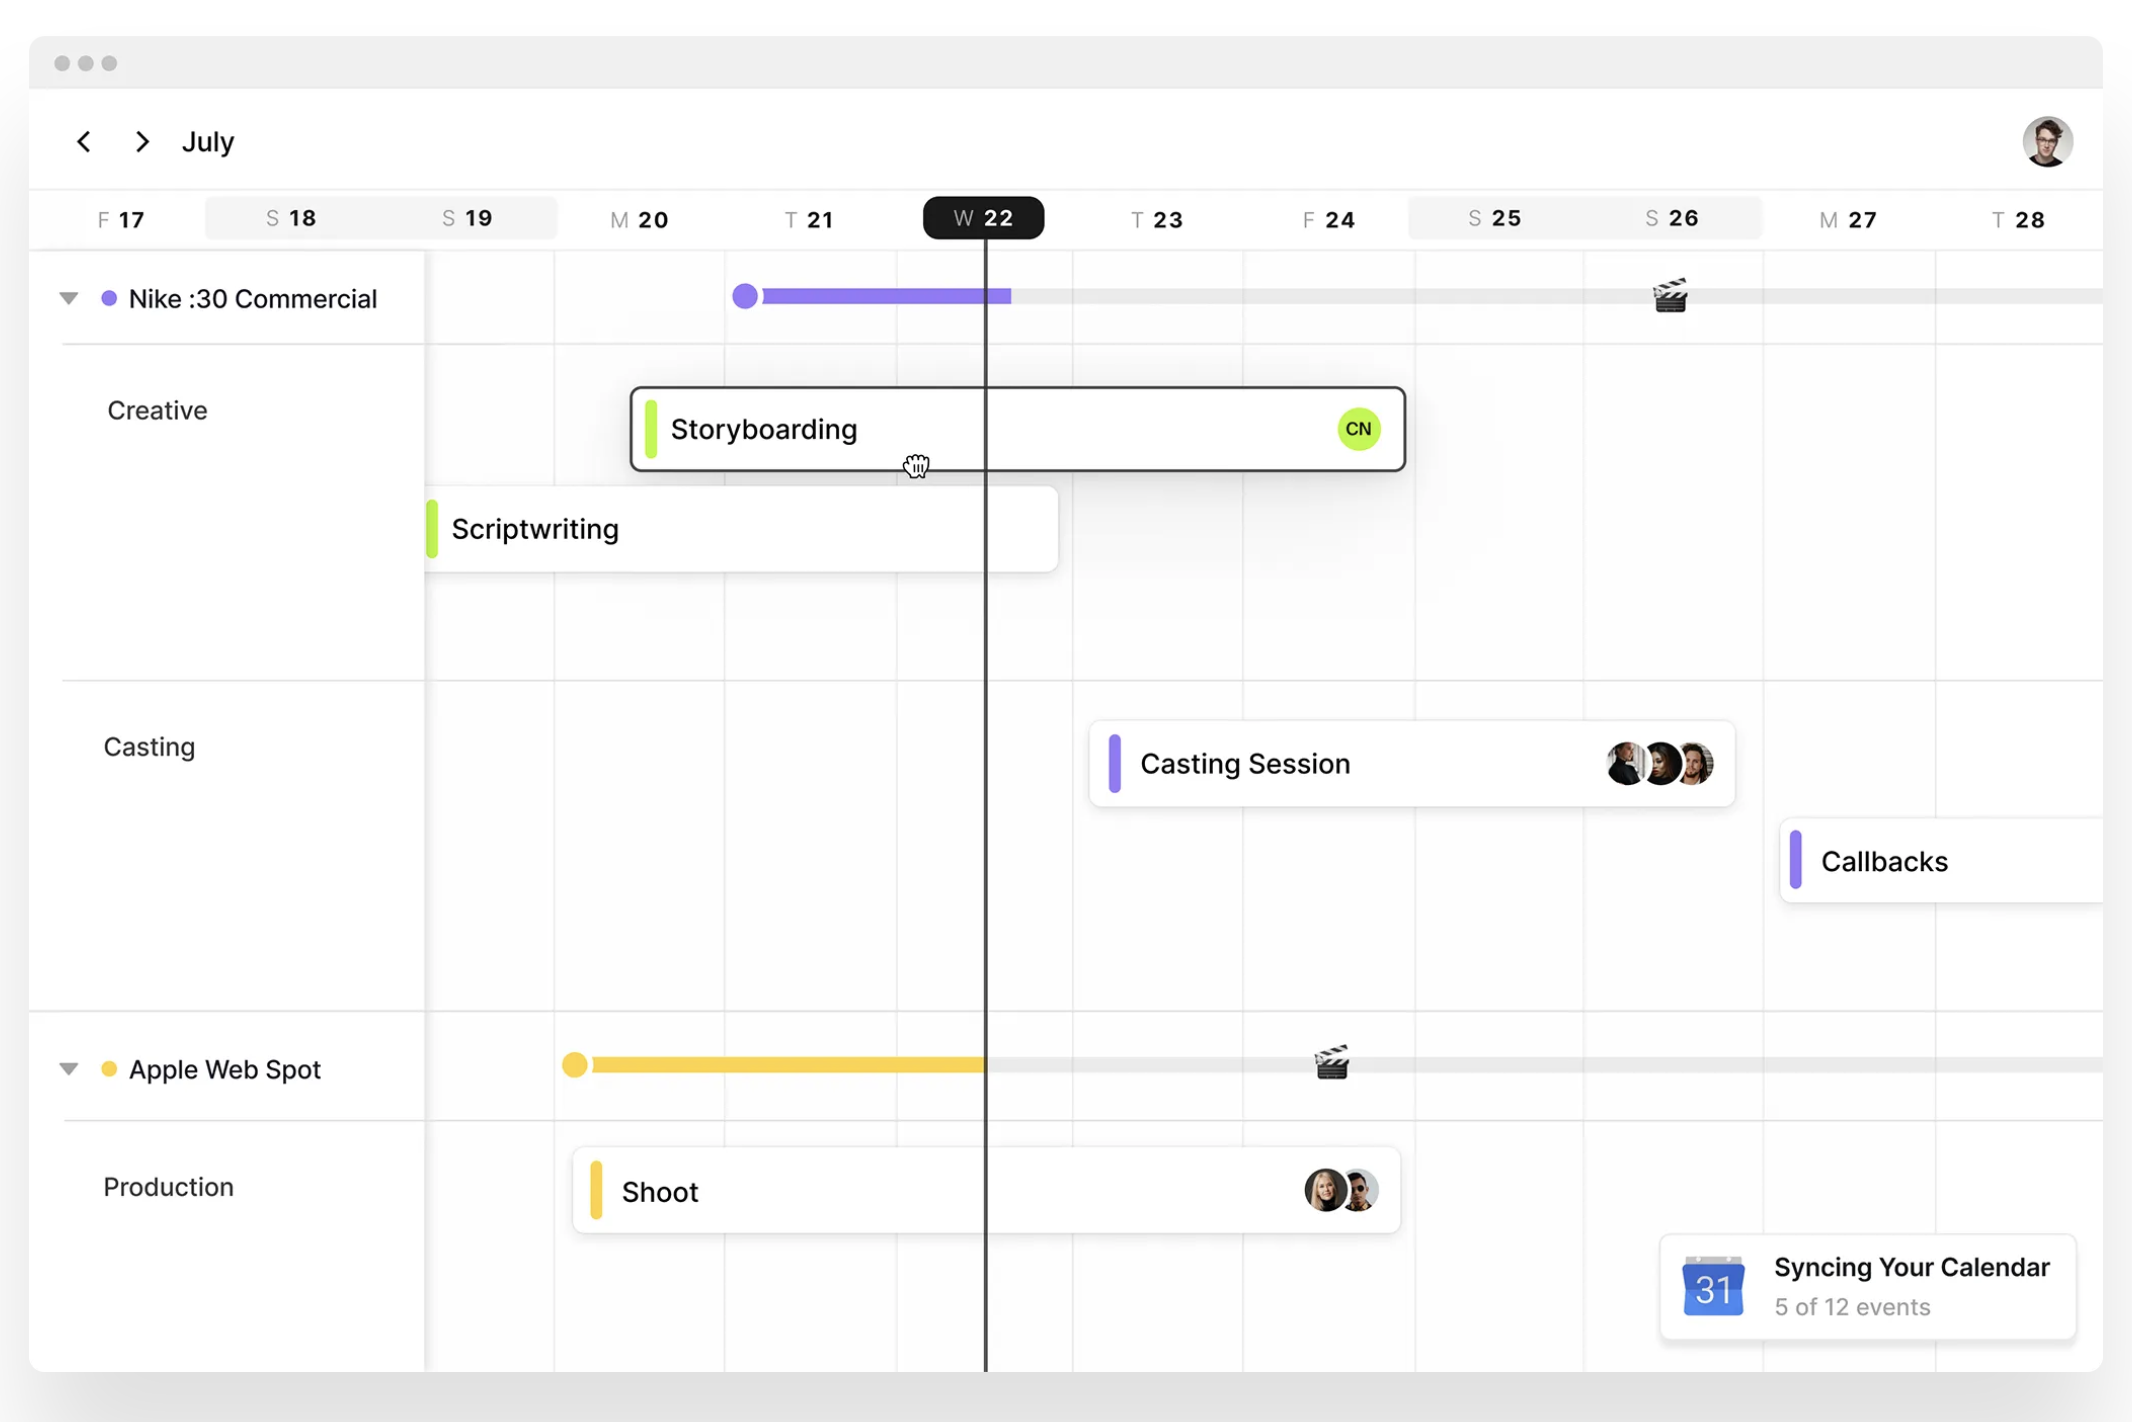 Build calendars in month and timeline (GANTT) views.